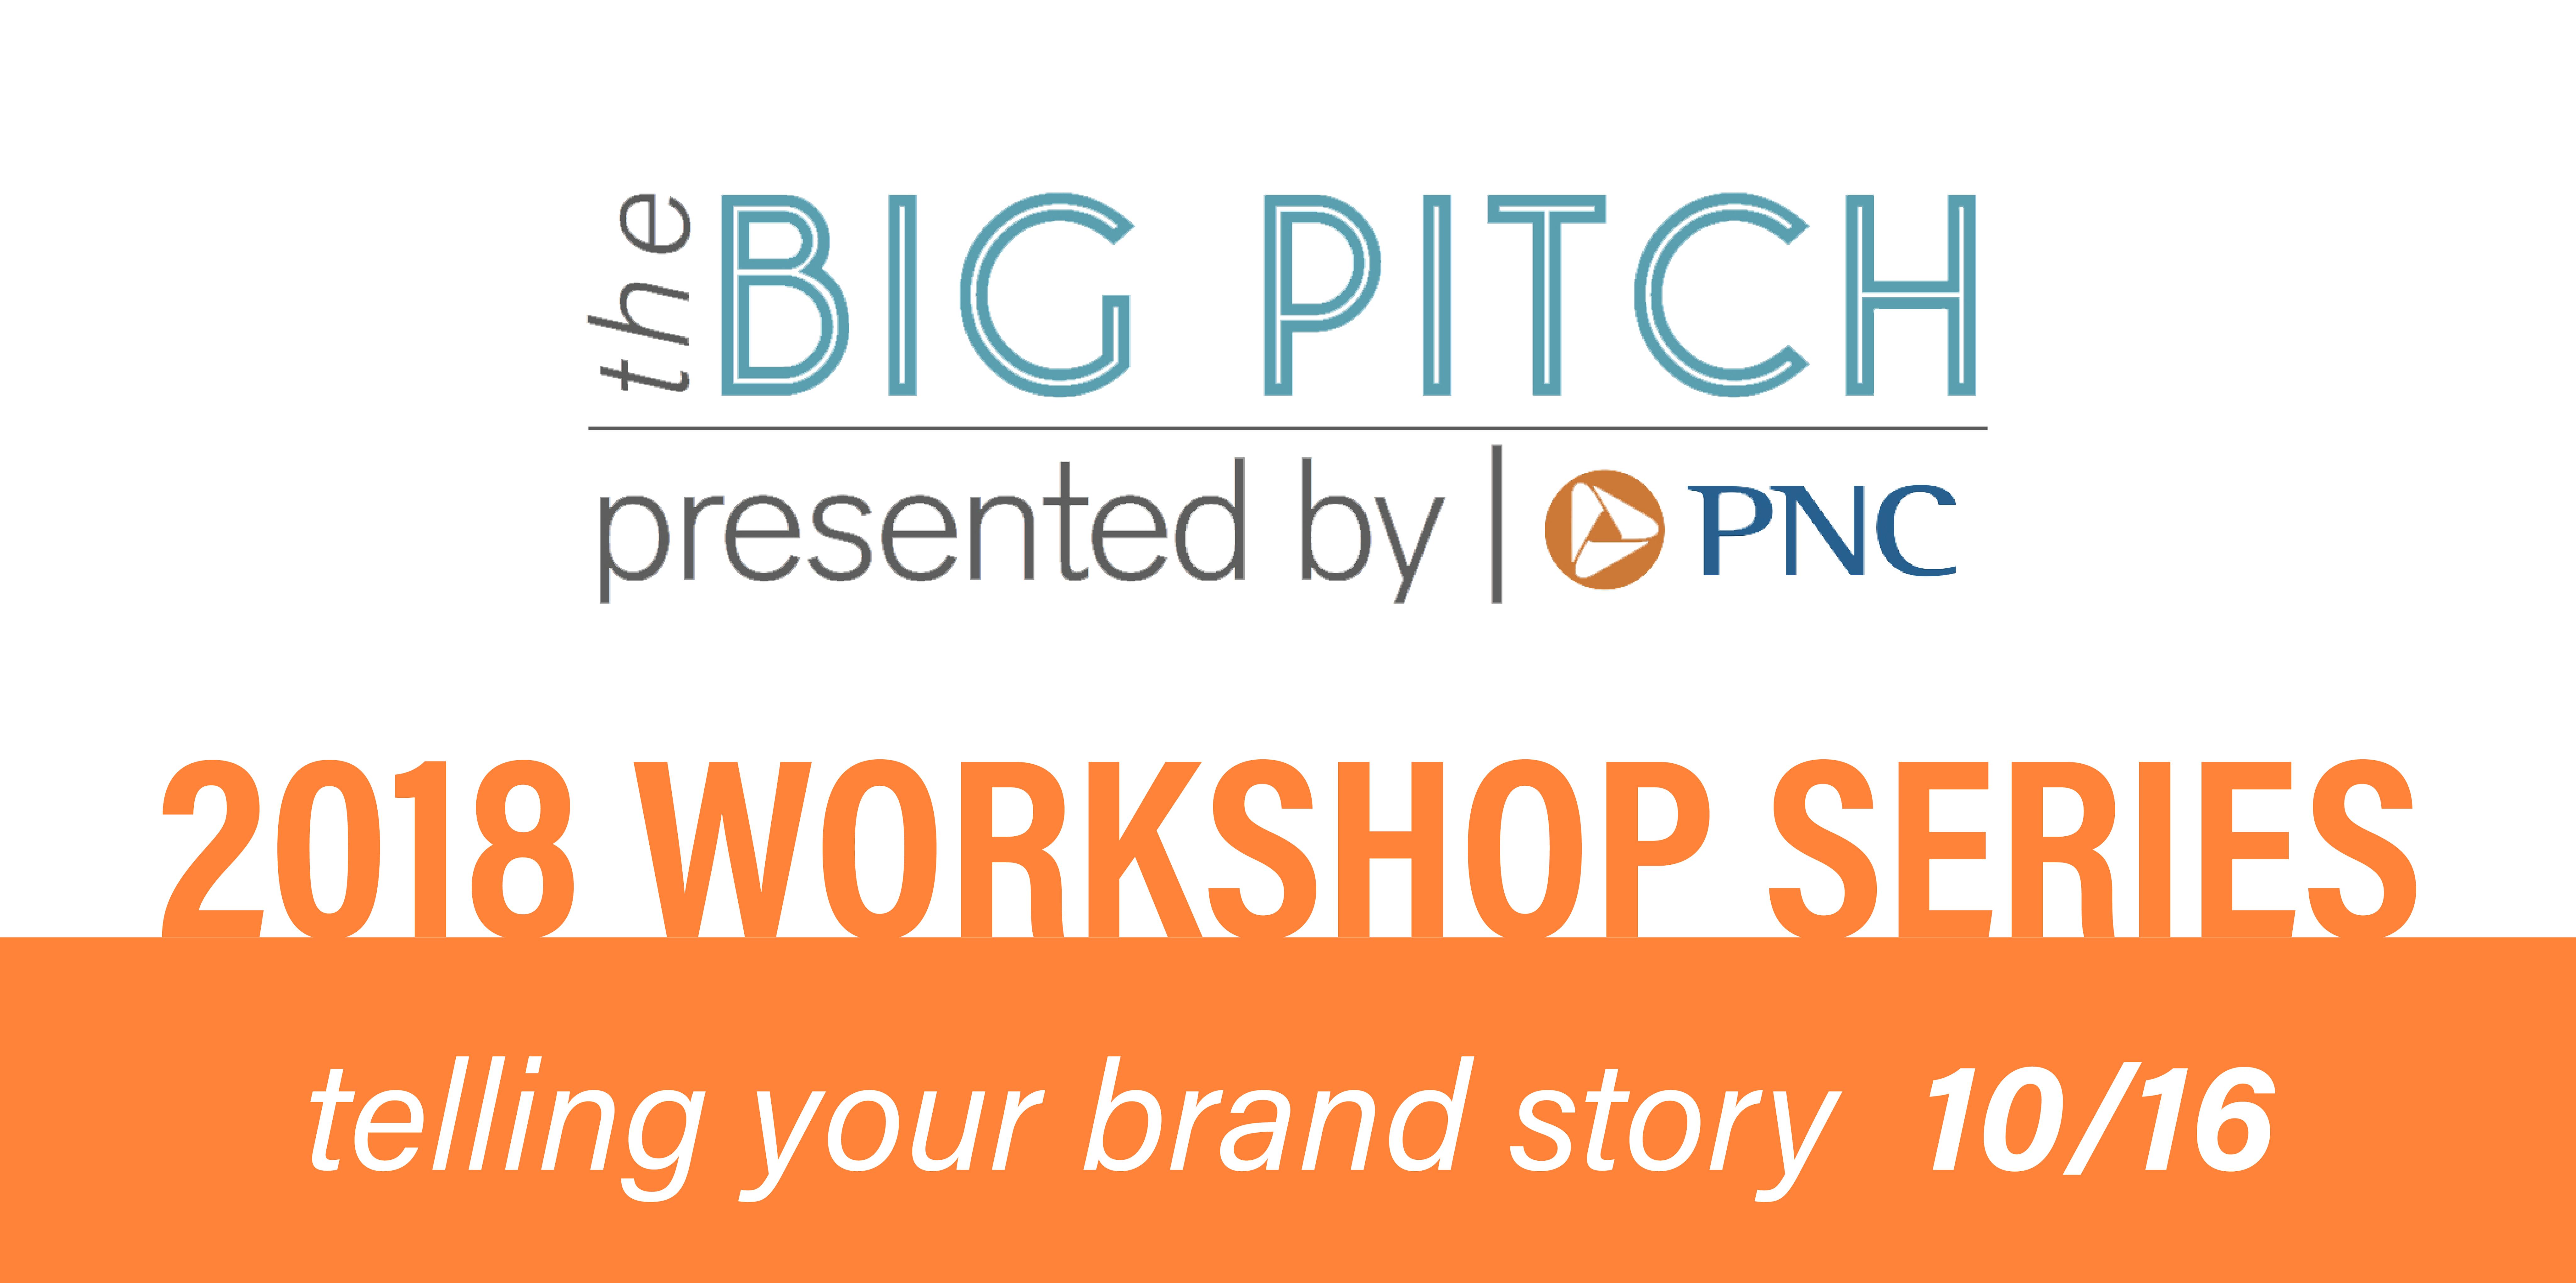 Telling Your Brand Story - The Big Pitch Presented by PNC Workshop Series